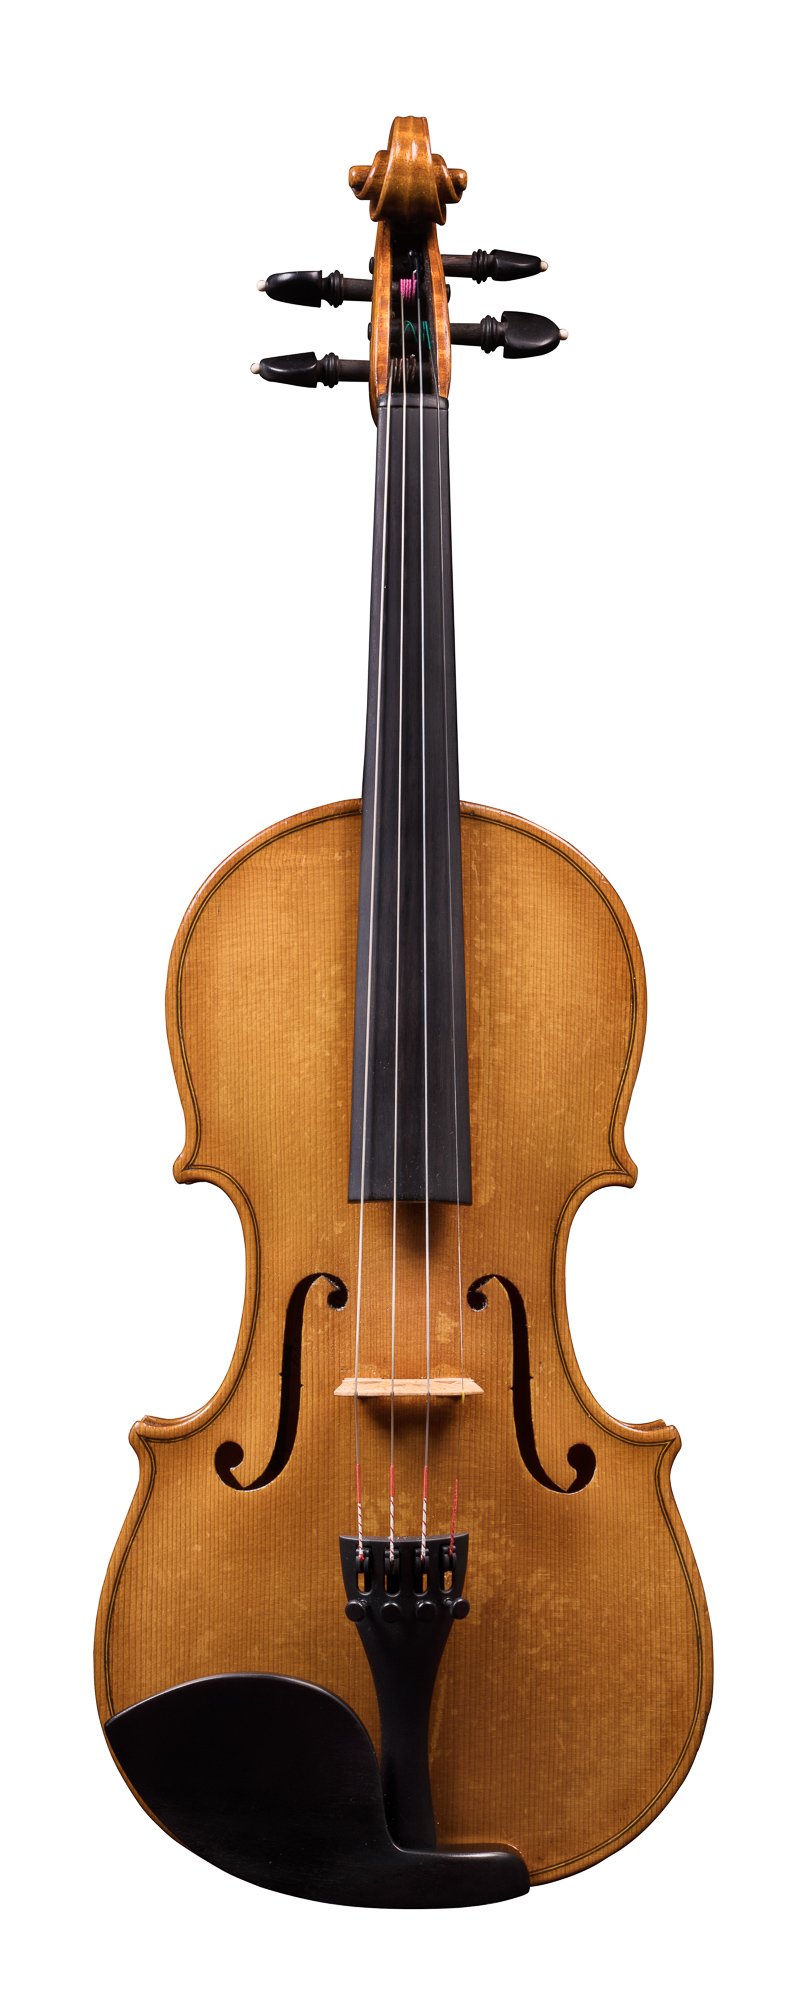 Violin by Wolff Brothers, Germany c.1900 (No. 114)